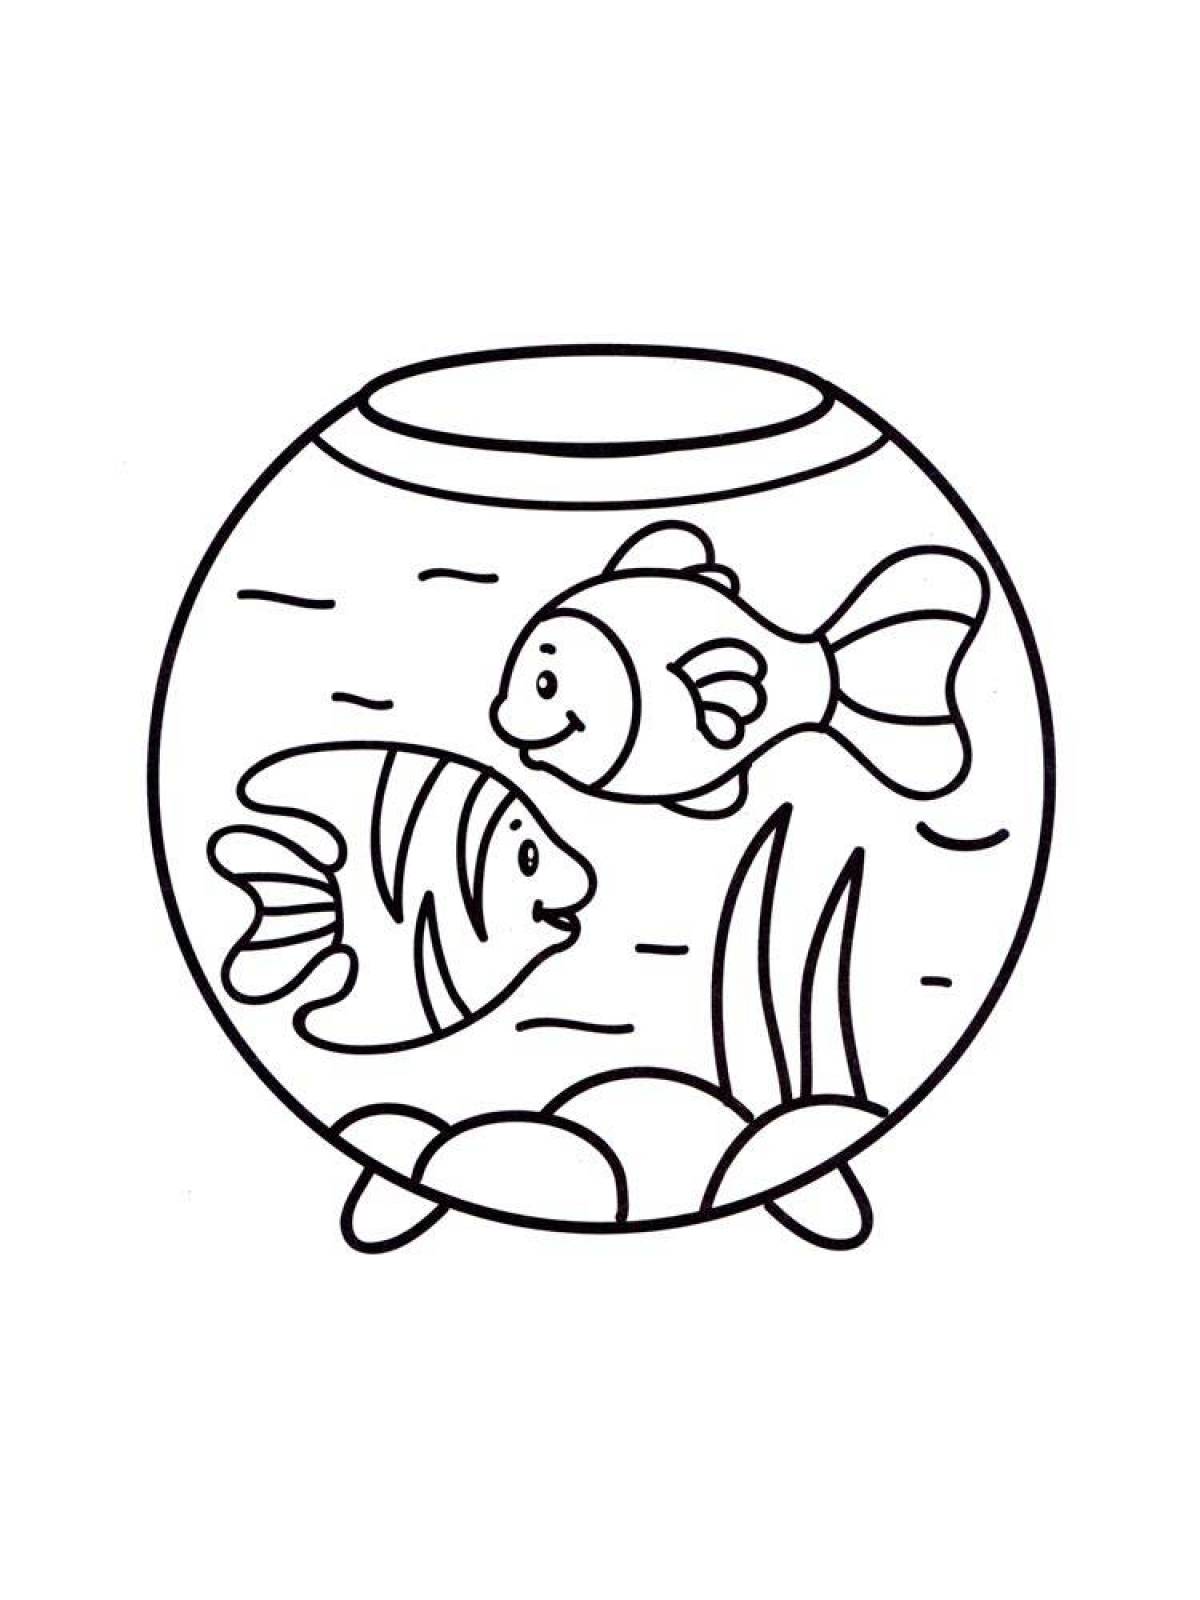 Attractive fish tank coloring page for kids